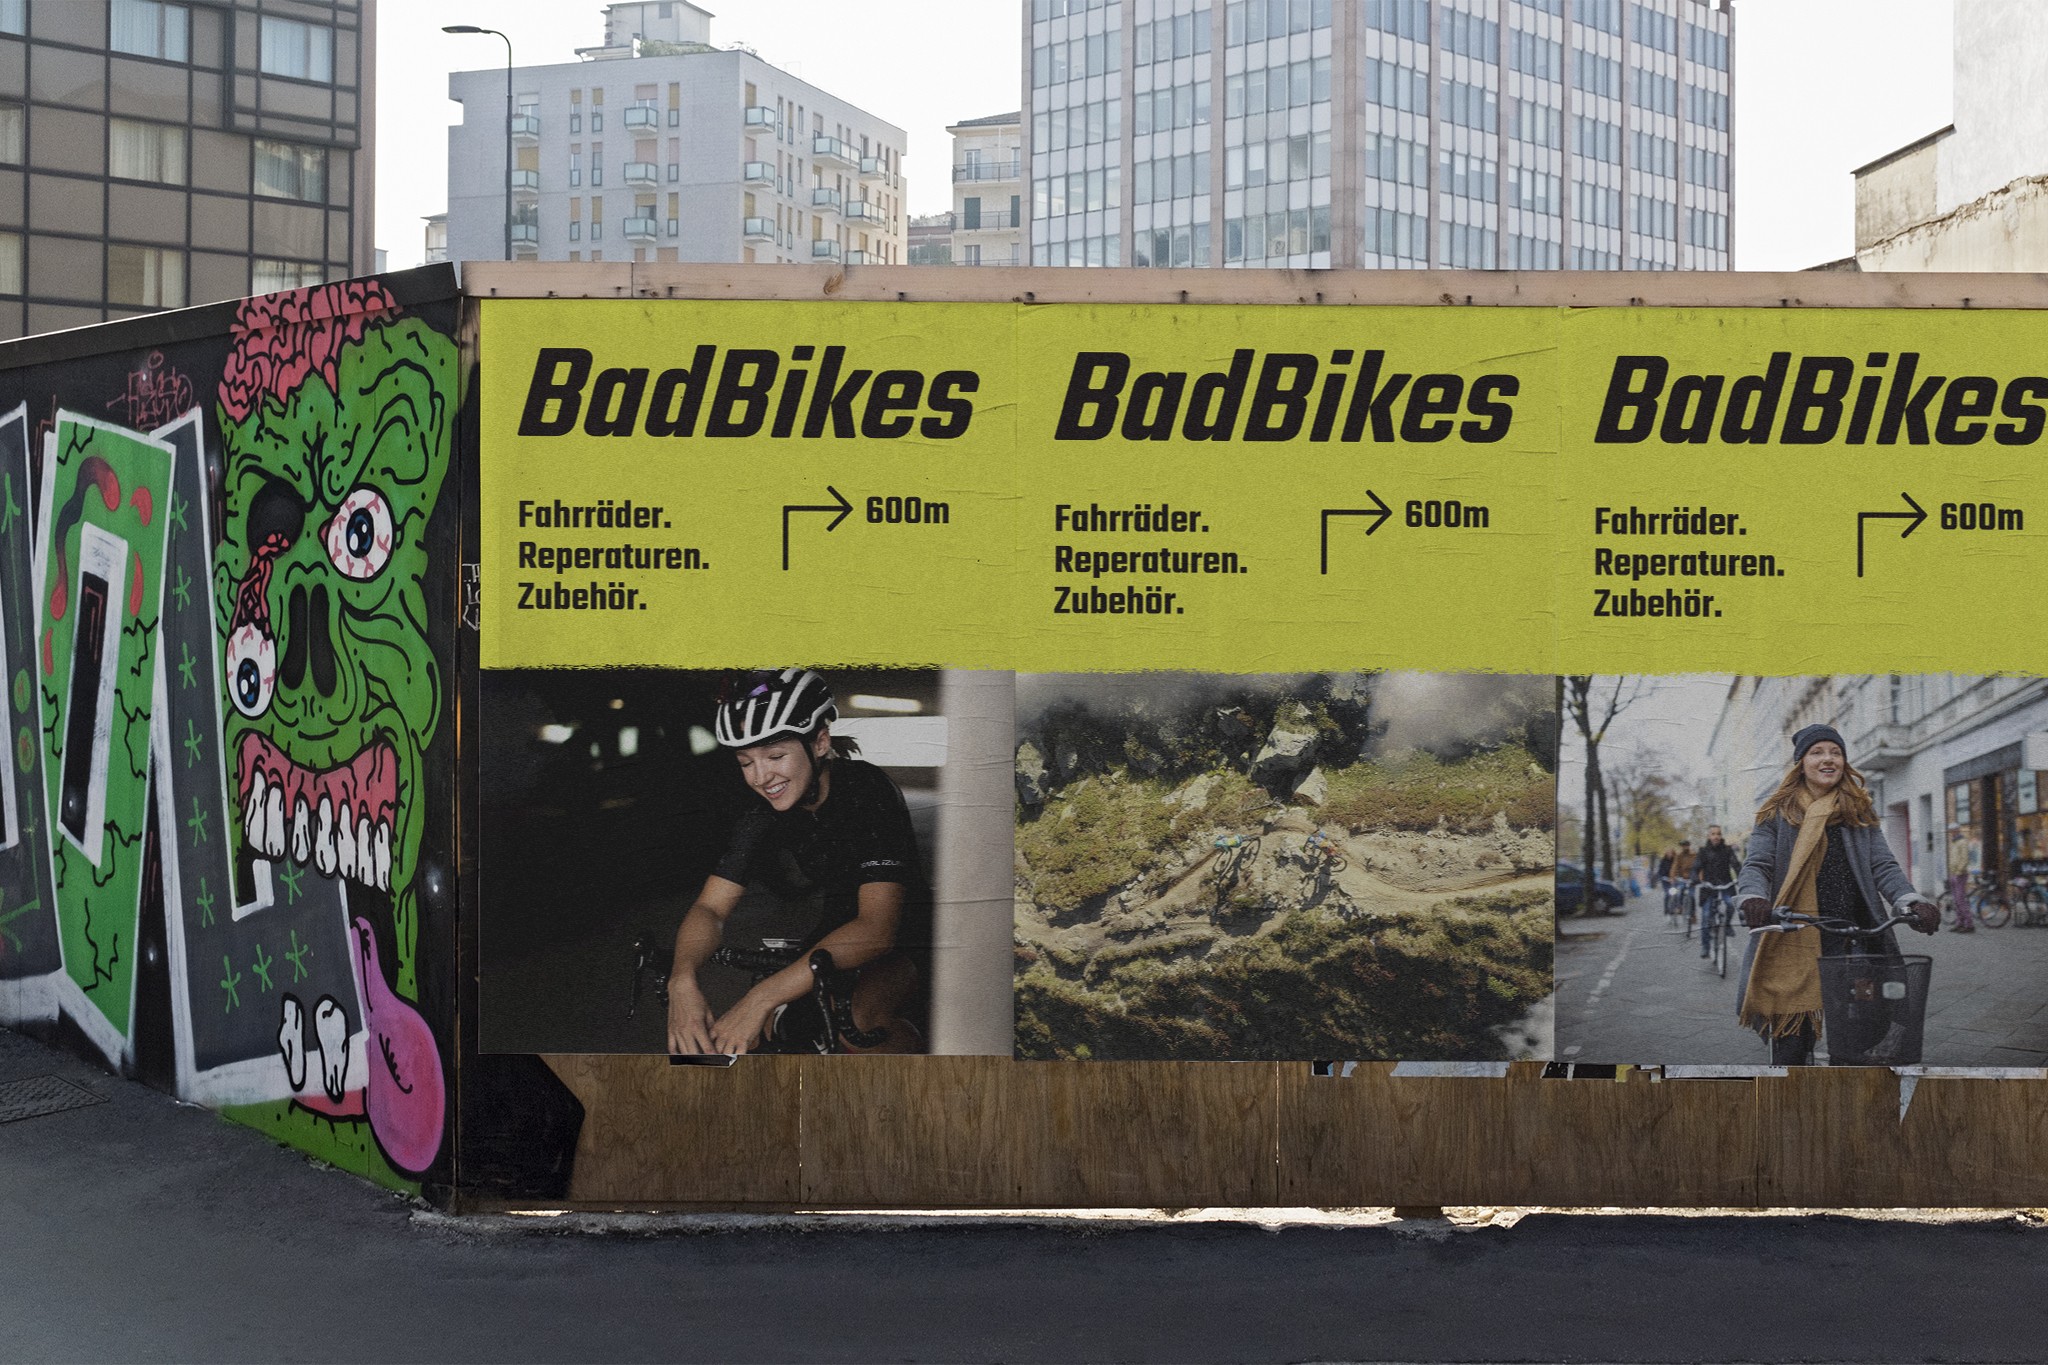 Image depicts three posters of an advertisement for a bicycle shop hanging on a construction fence. The posters feature the Bad Bikes Berlin logo, images and directions to find the shop.